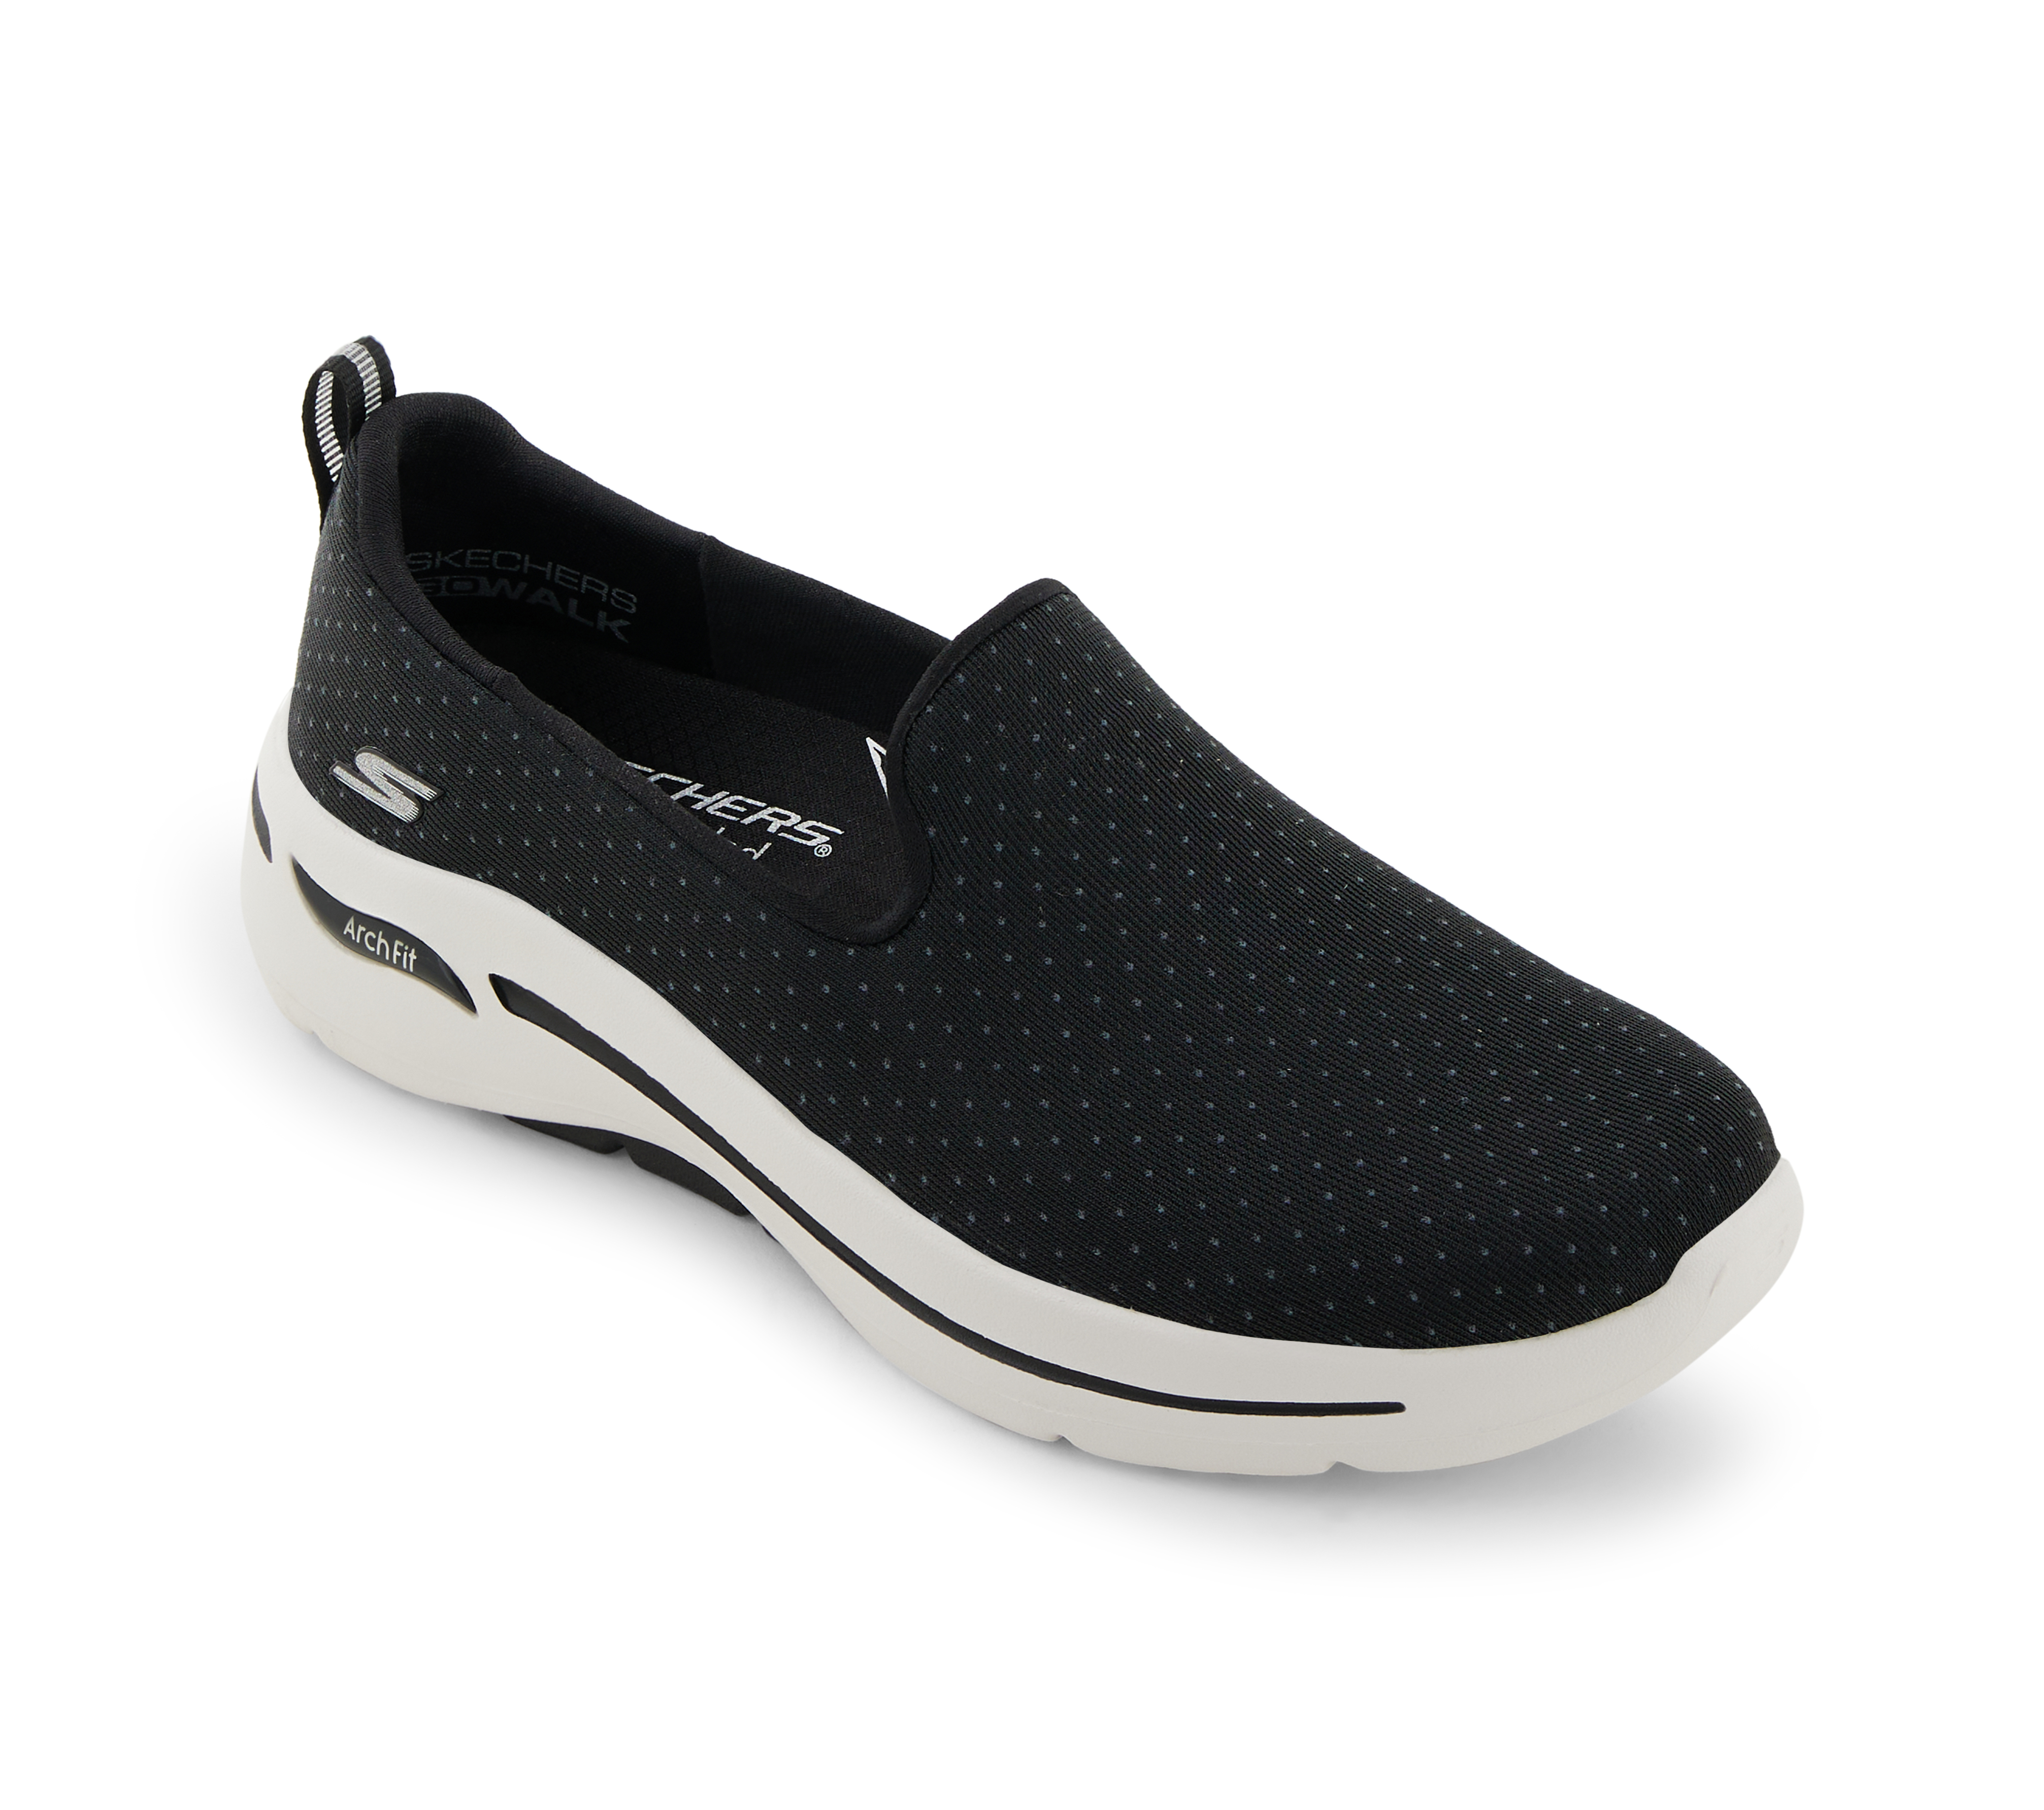 GO WALK ARCH FIT - MORNING ST, BLACK/WHITE Footwear Lateral View